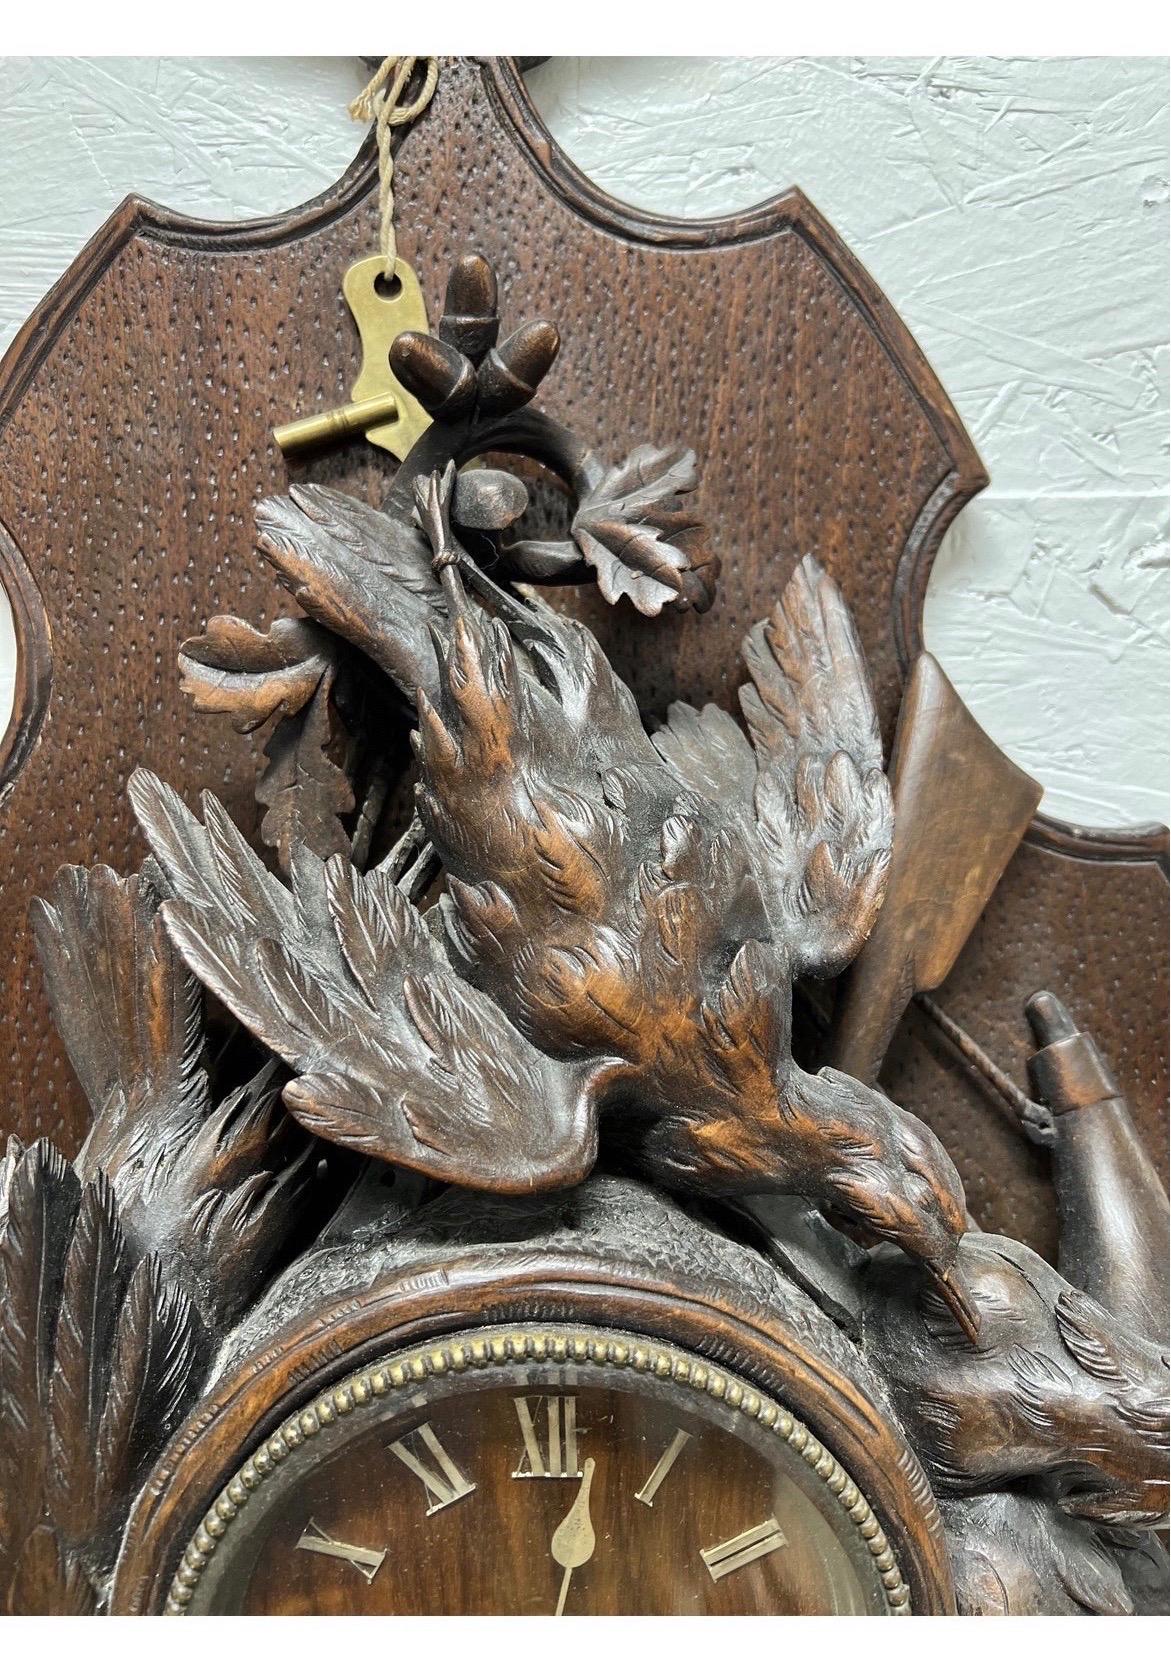 One of the most impressive masterfully carved German or Swiss black forest wall clocks I have ever had in my possession circa 1880. The shear size and quality of the carvings is incredible.
Adorned with several duck and bird forms to the clock, a